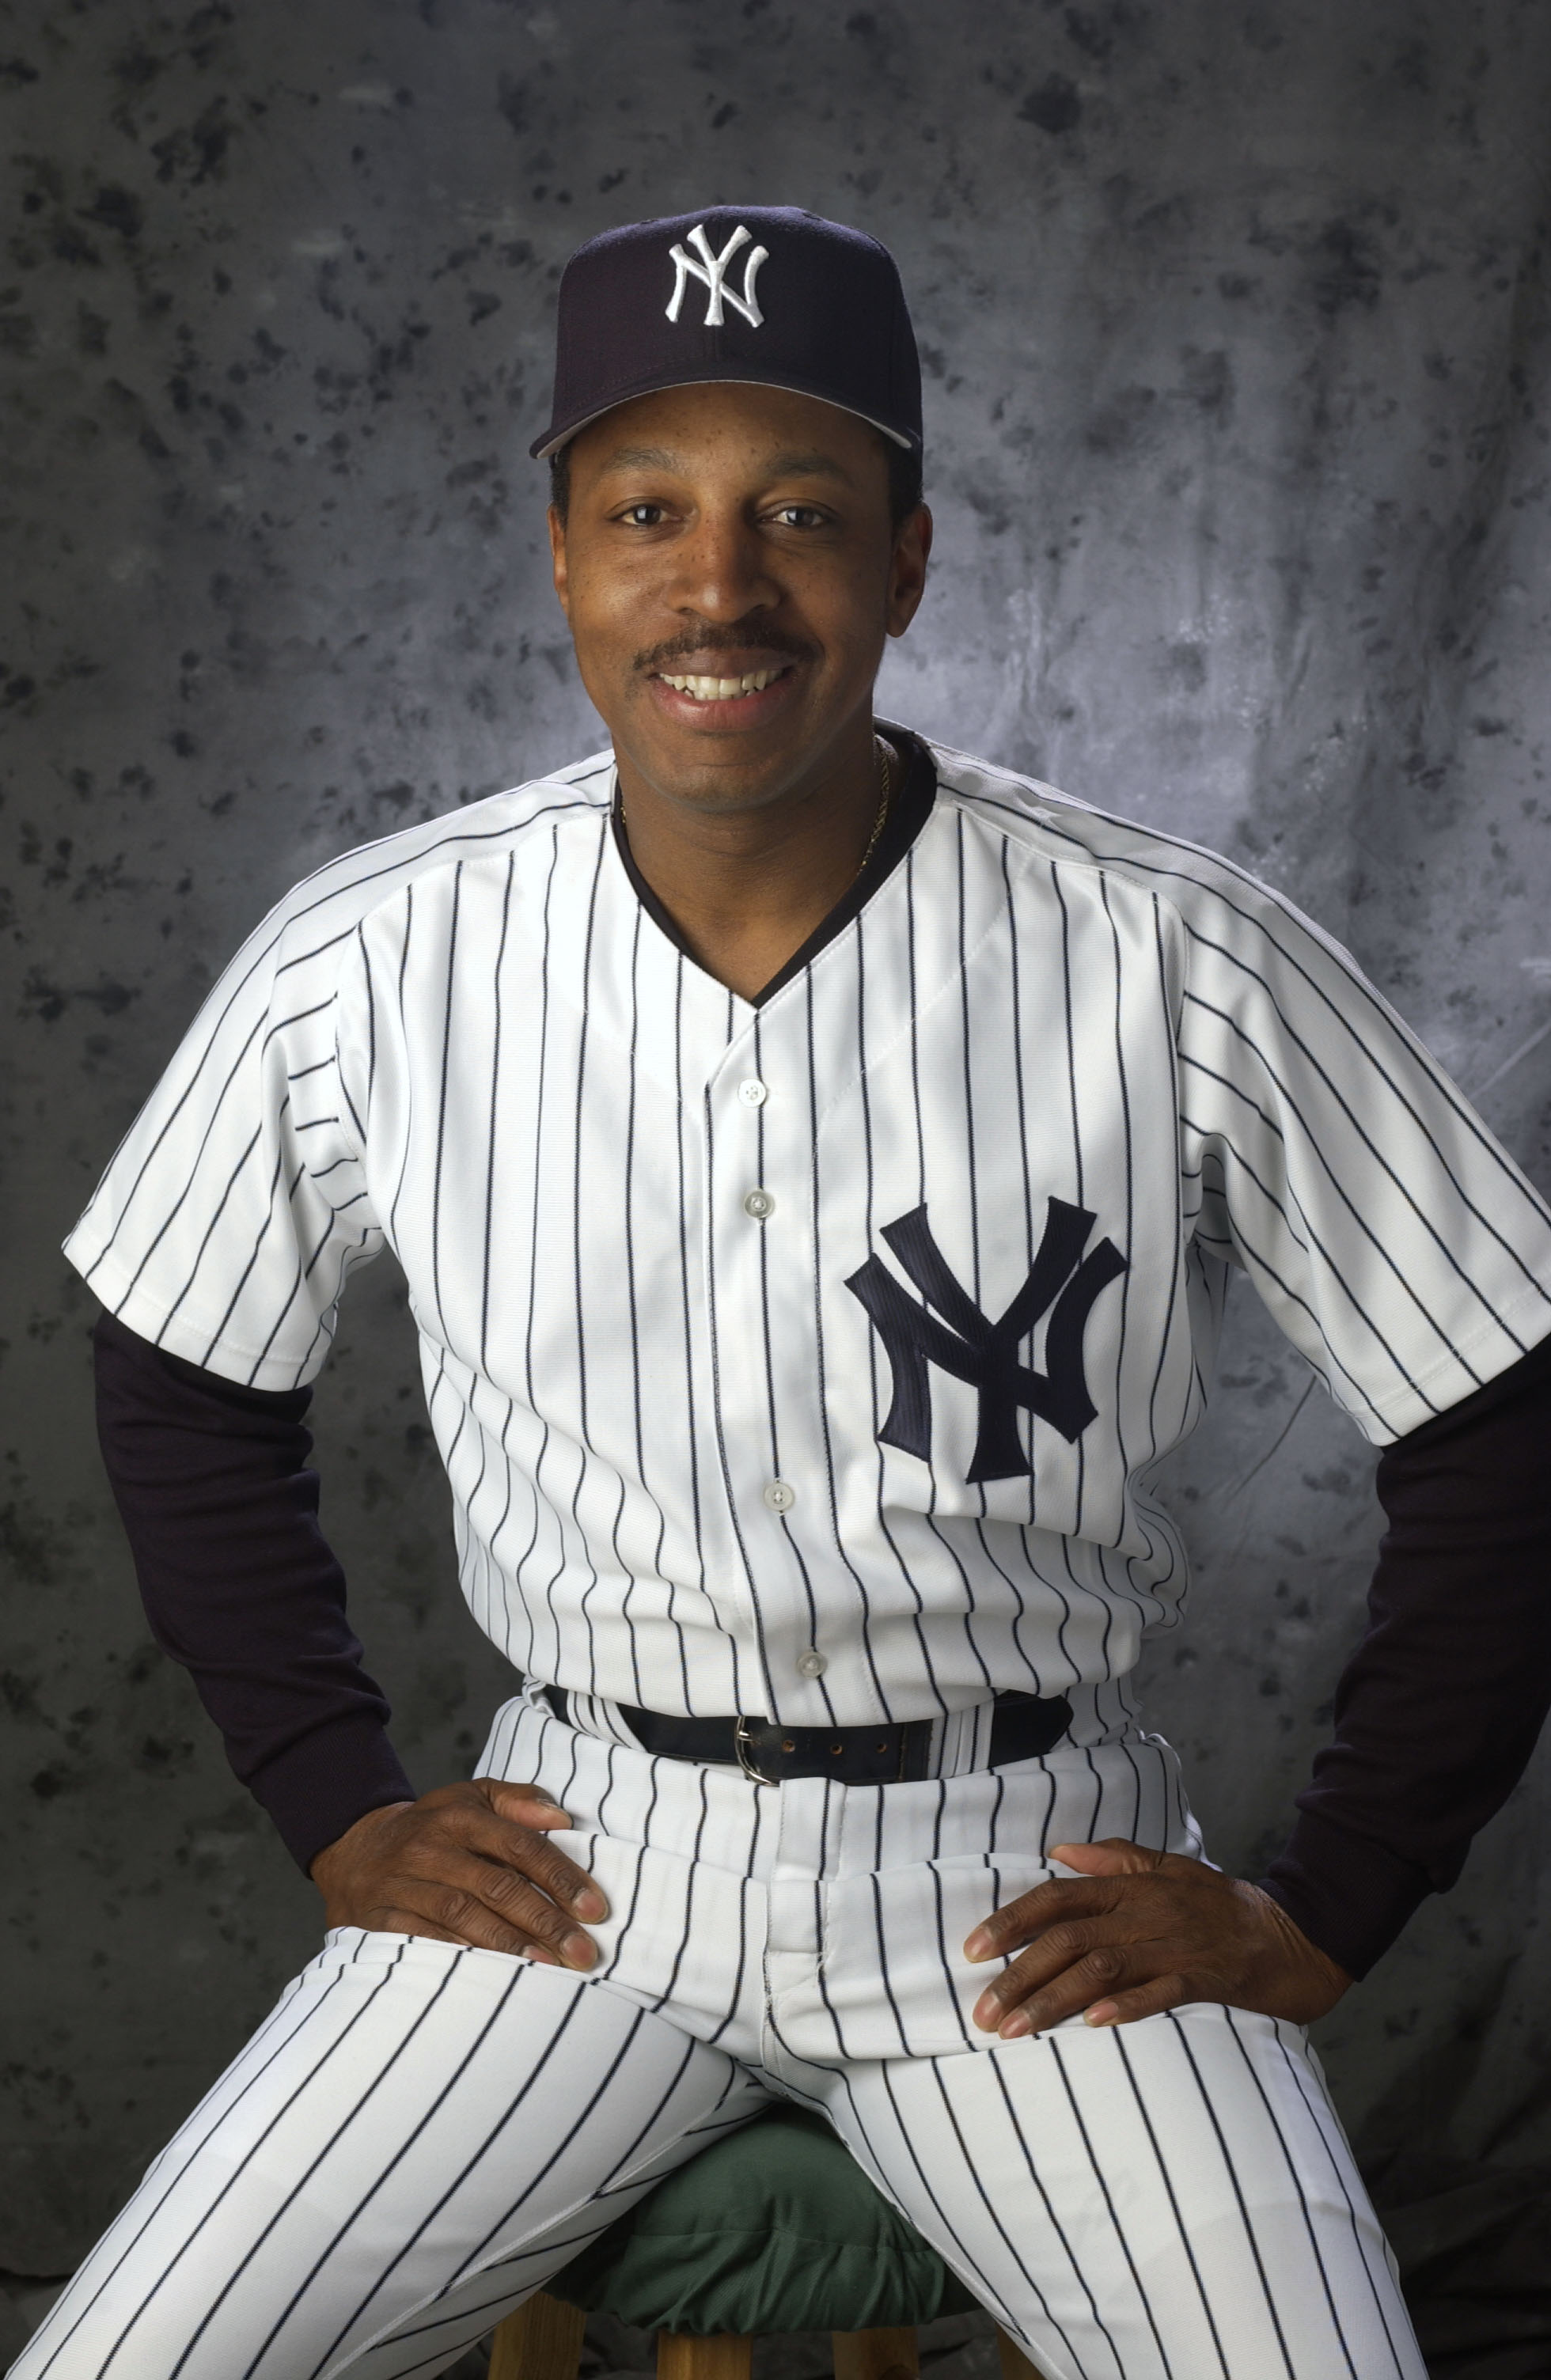 20 Feb 2002:   A portrait of Yankees'' thirdbase coach Willie Randolph #30 during the New York Yankees Media Day at Legends Field in Tampa, Florida.DIGITAL IMAGE Photographer:  M. David Leeds/Getty Images